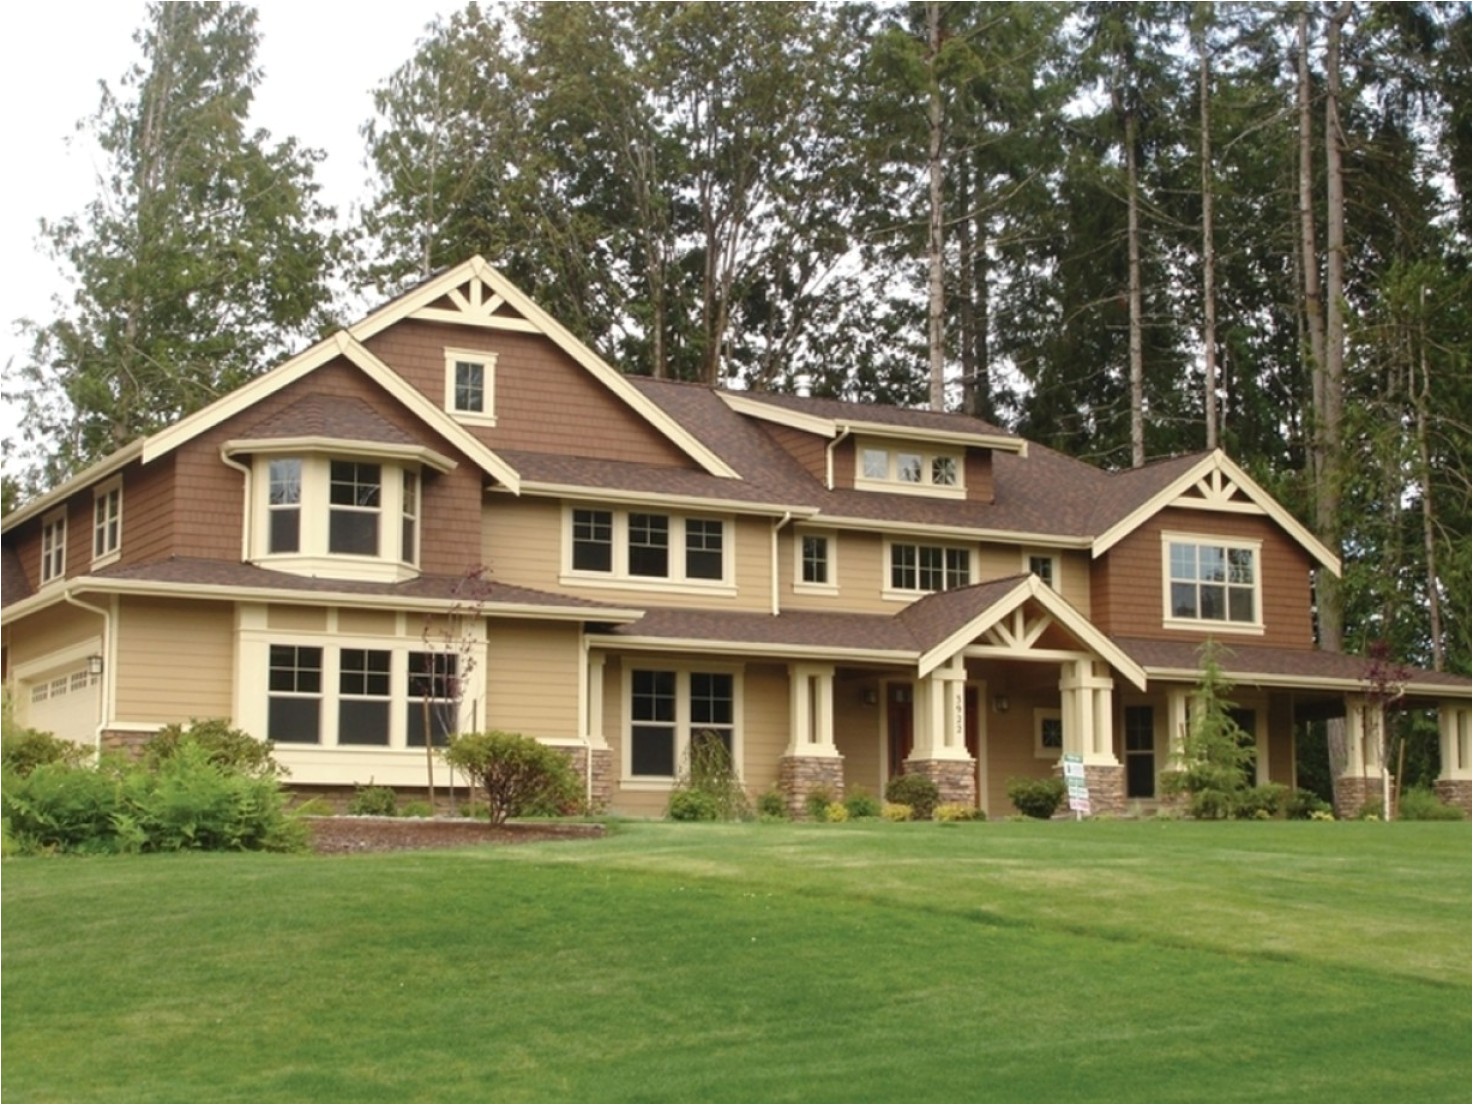 luxury craftsman style house plans characteristic